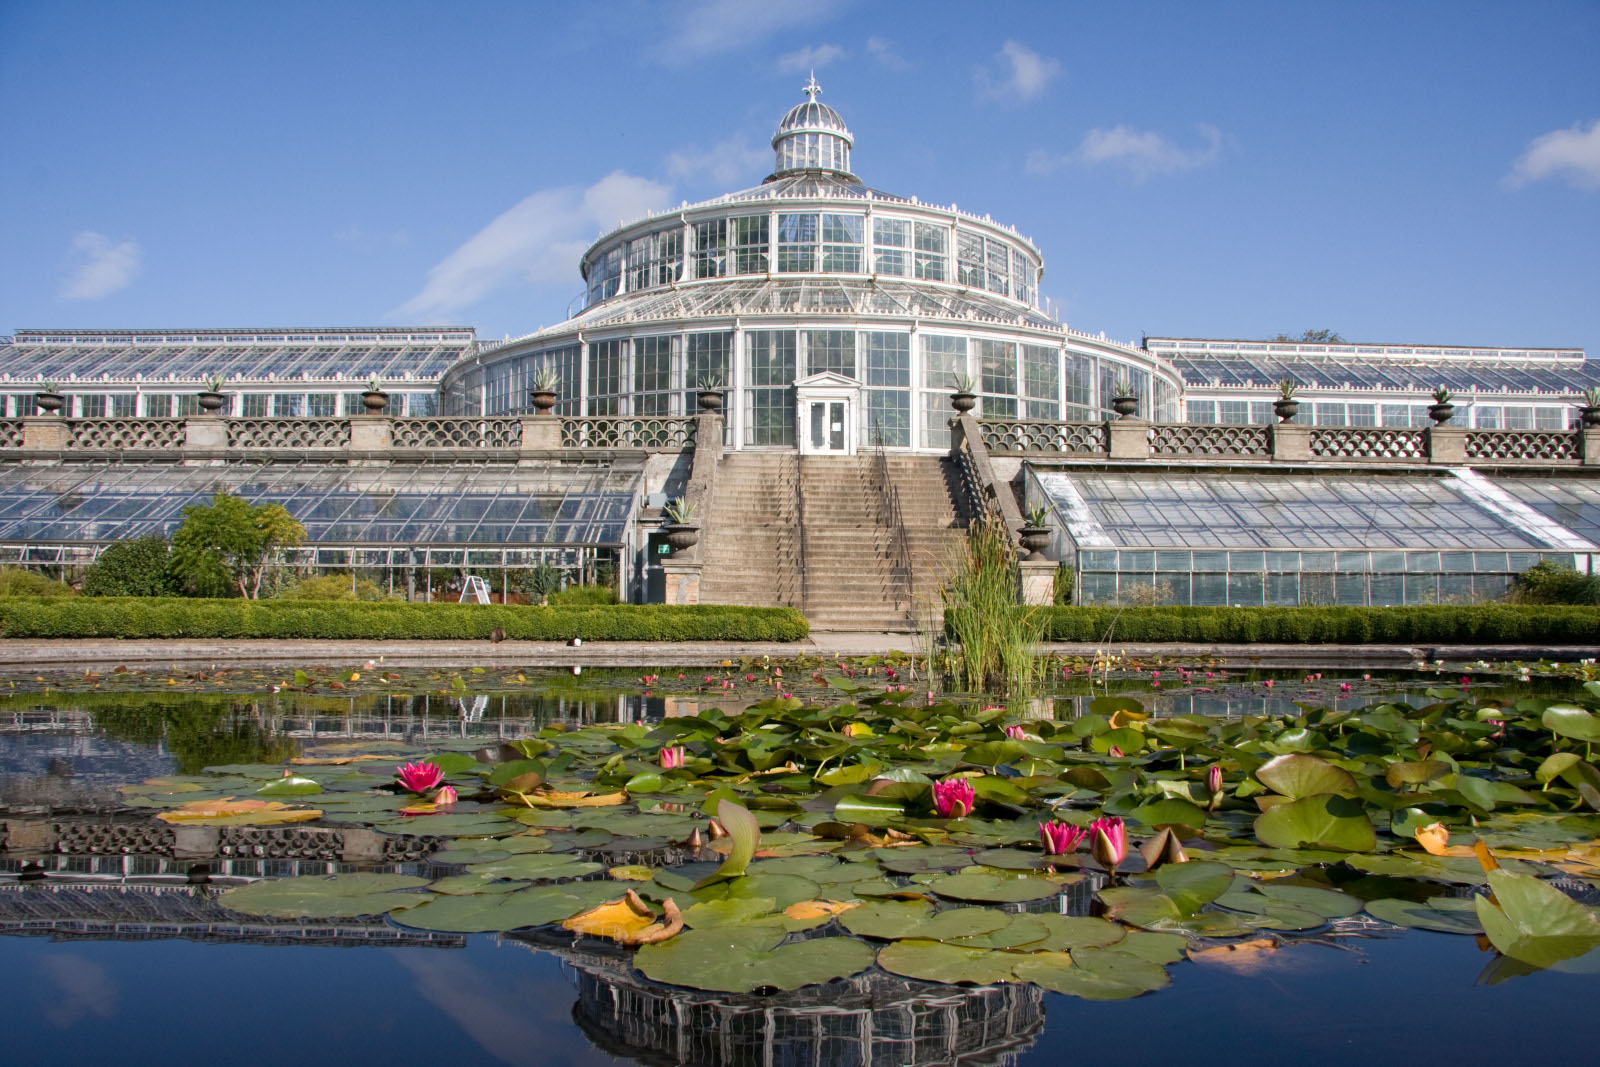 A photo of a very large green house, called the Palm House, situated in the Botanical Garden. A pond with water lillies is in front of the stairs leading up to the Palm House.